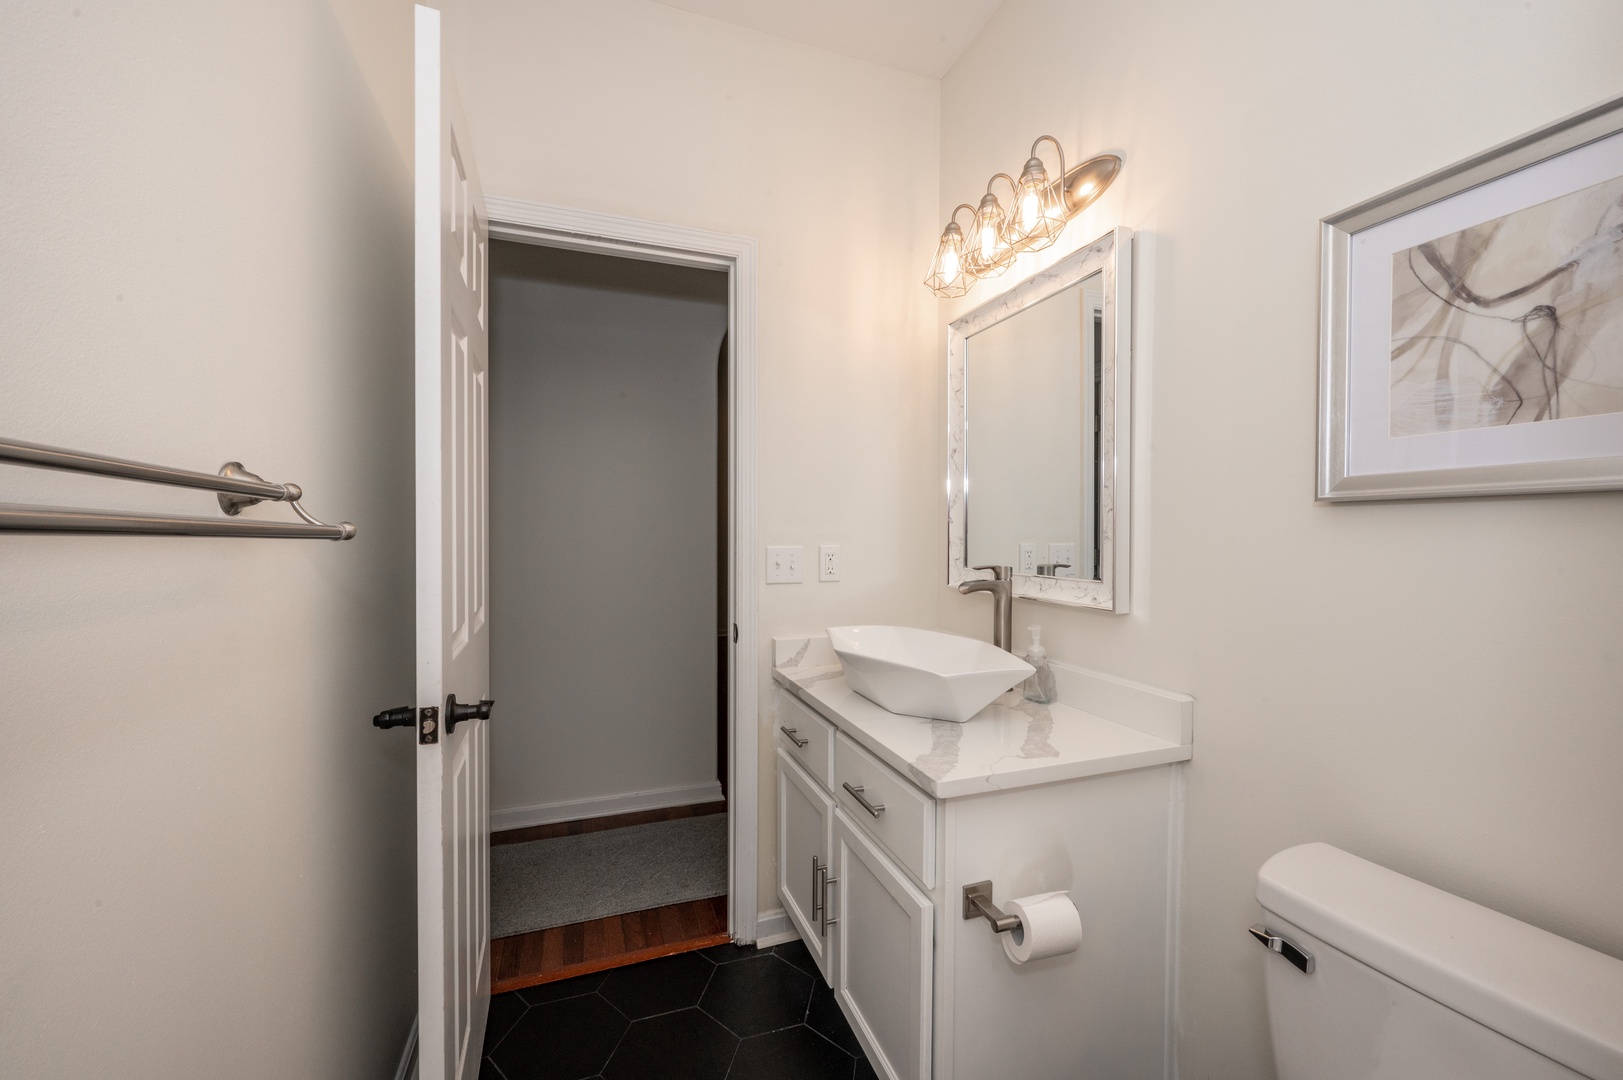 The 2nd floor full bath offers a stylish vanity & shower/tub combo